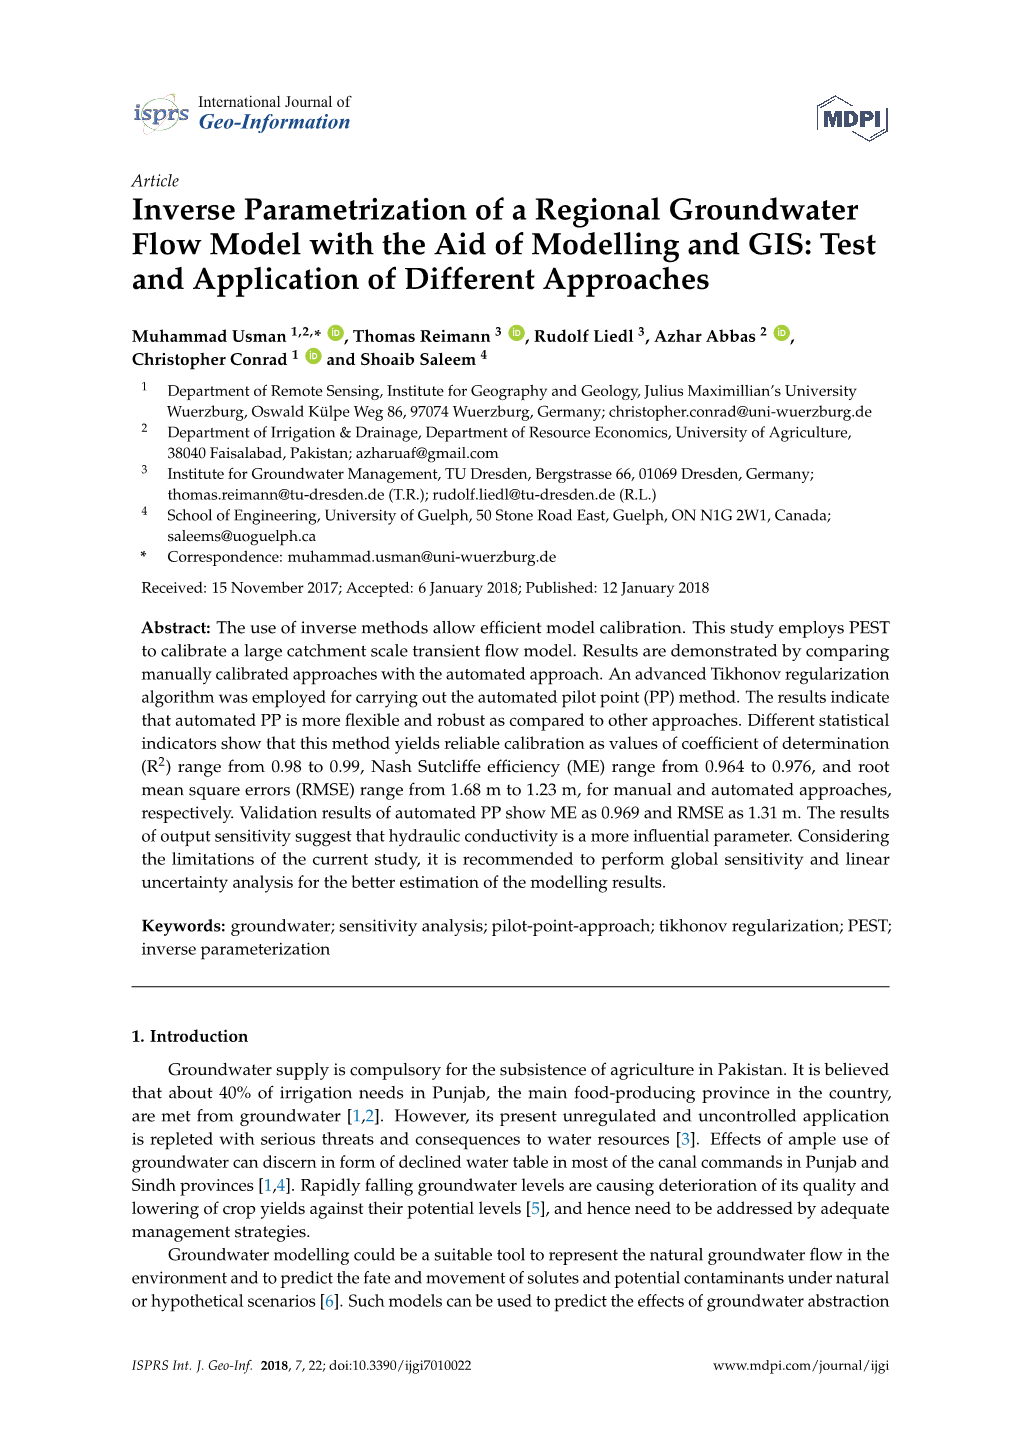 Inverse Parametrization of a Regional Groundwater Flow Model with the Aid of Modelling and GIS: Test and Application of Different Approaches